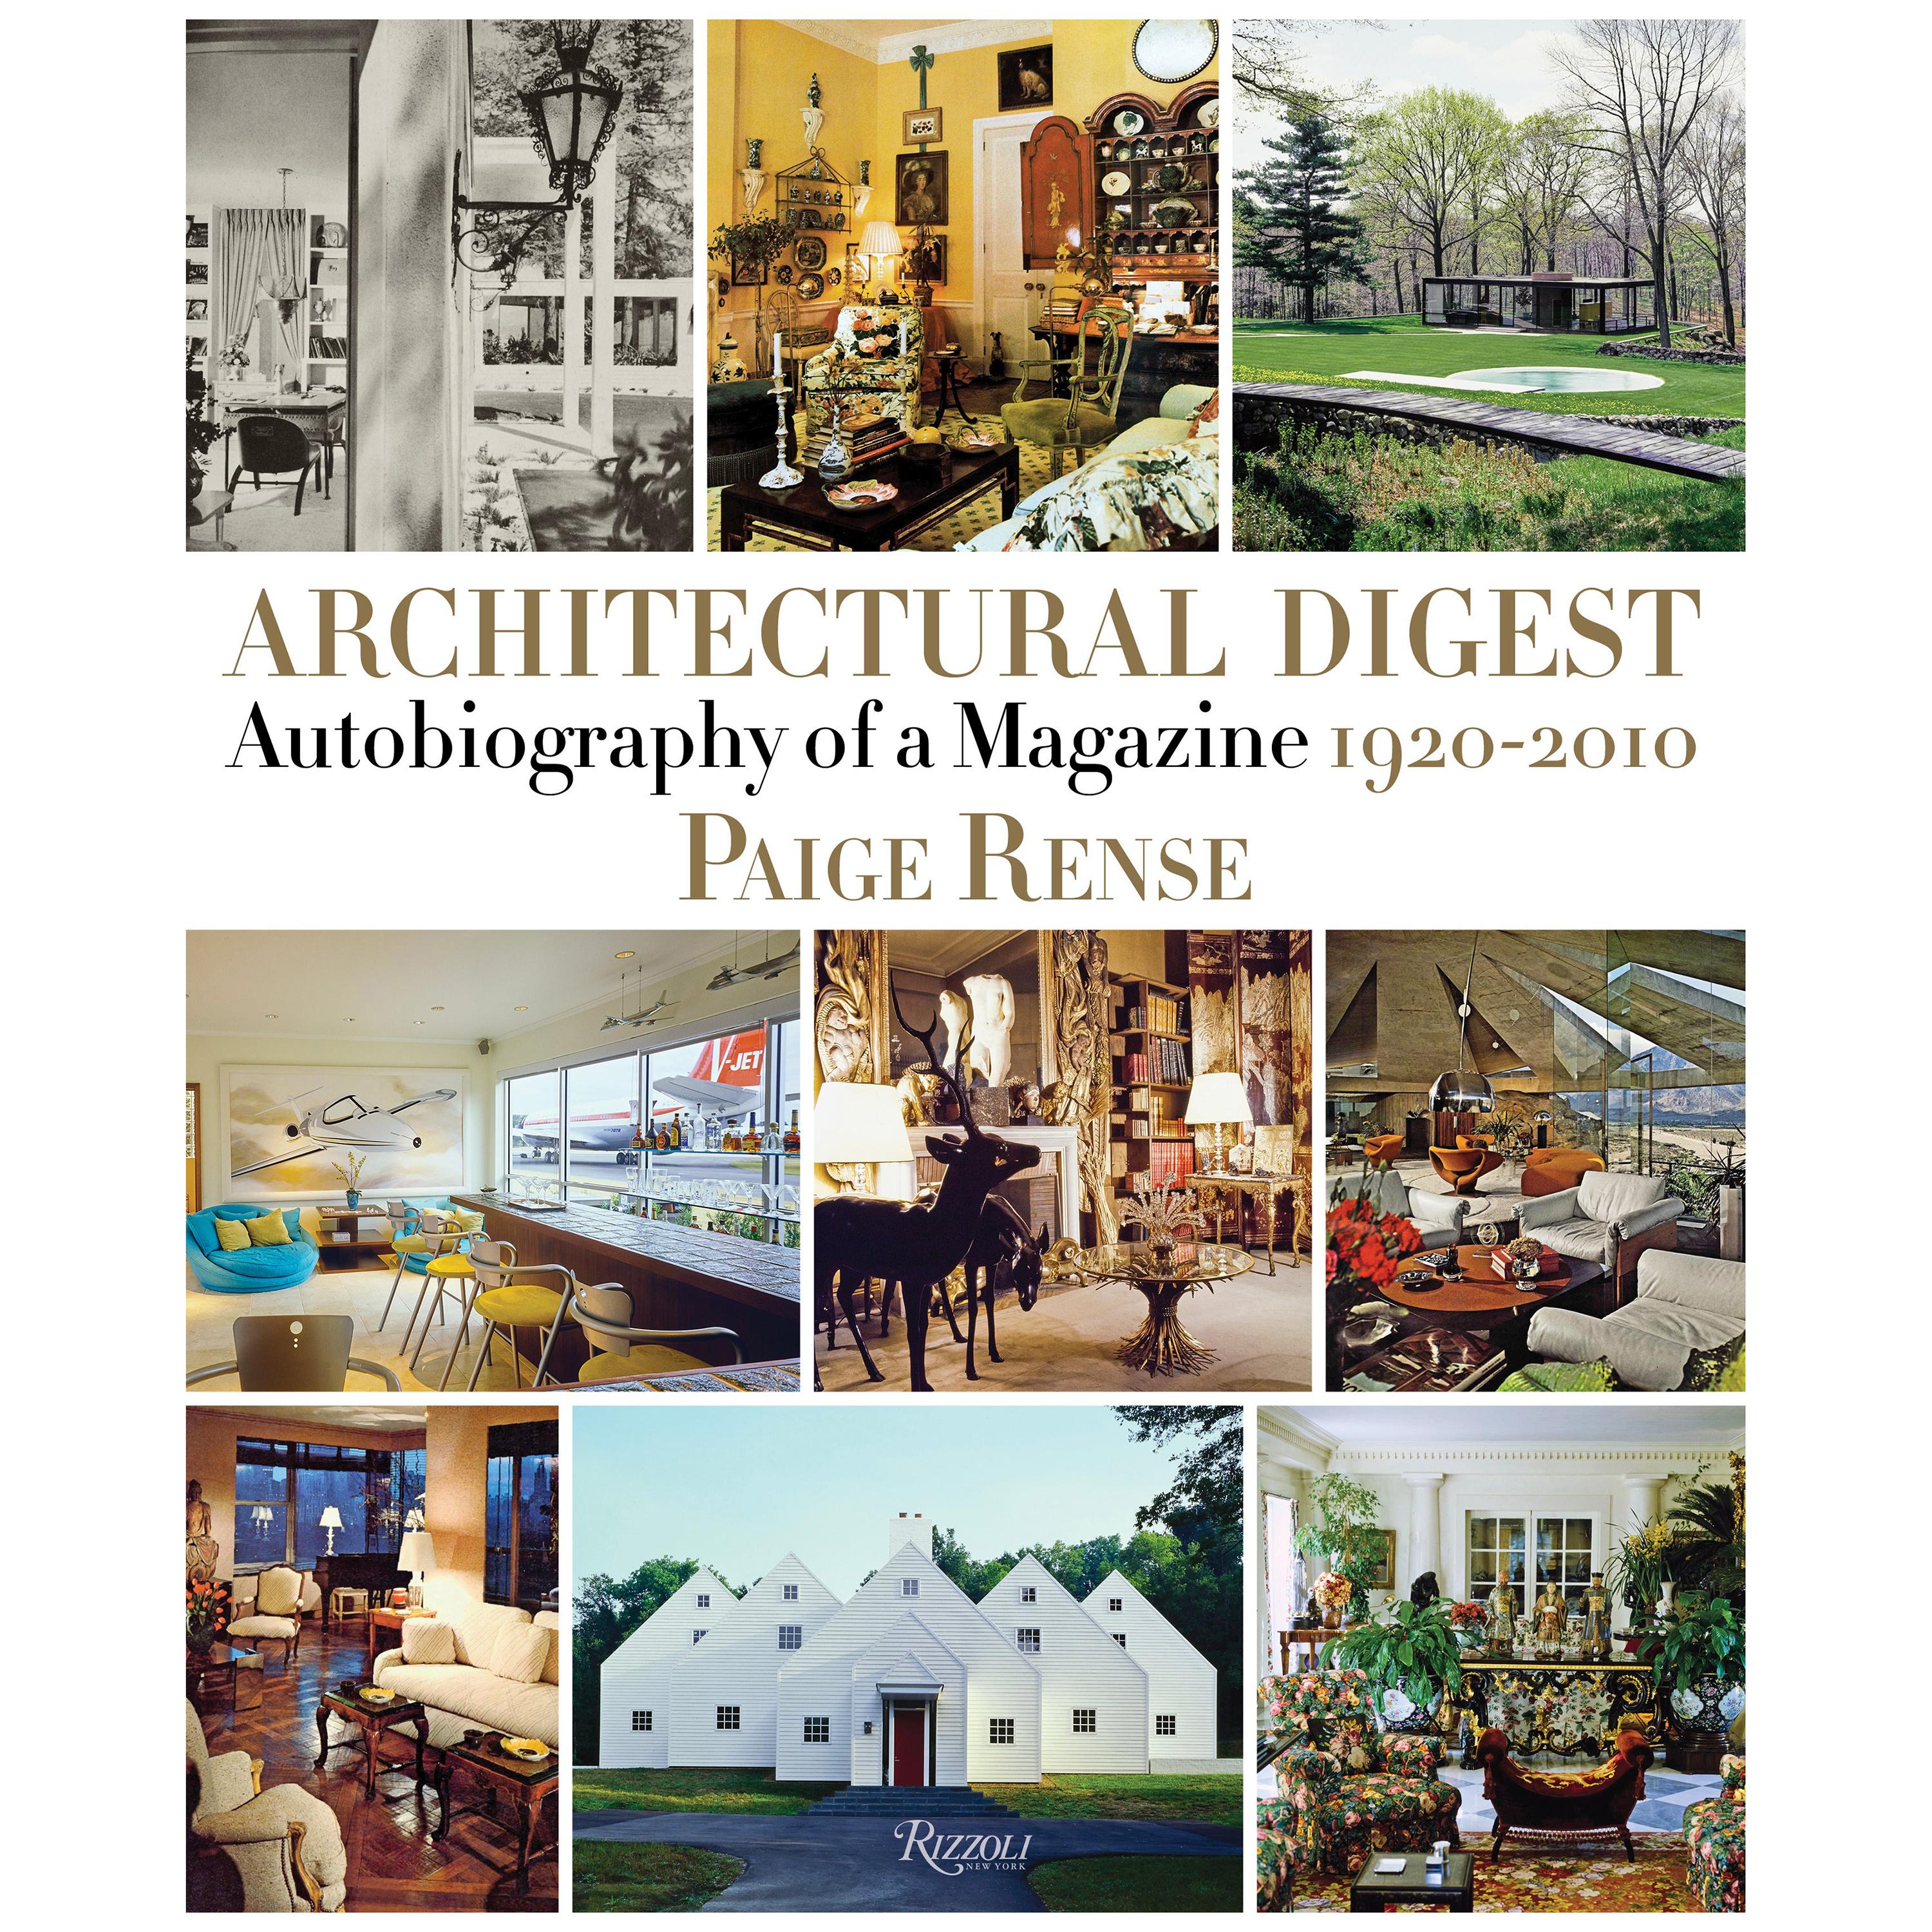 Architectural Digest Autobiography of a Magazine, 1920-2010